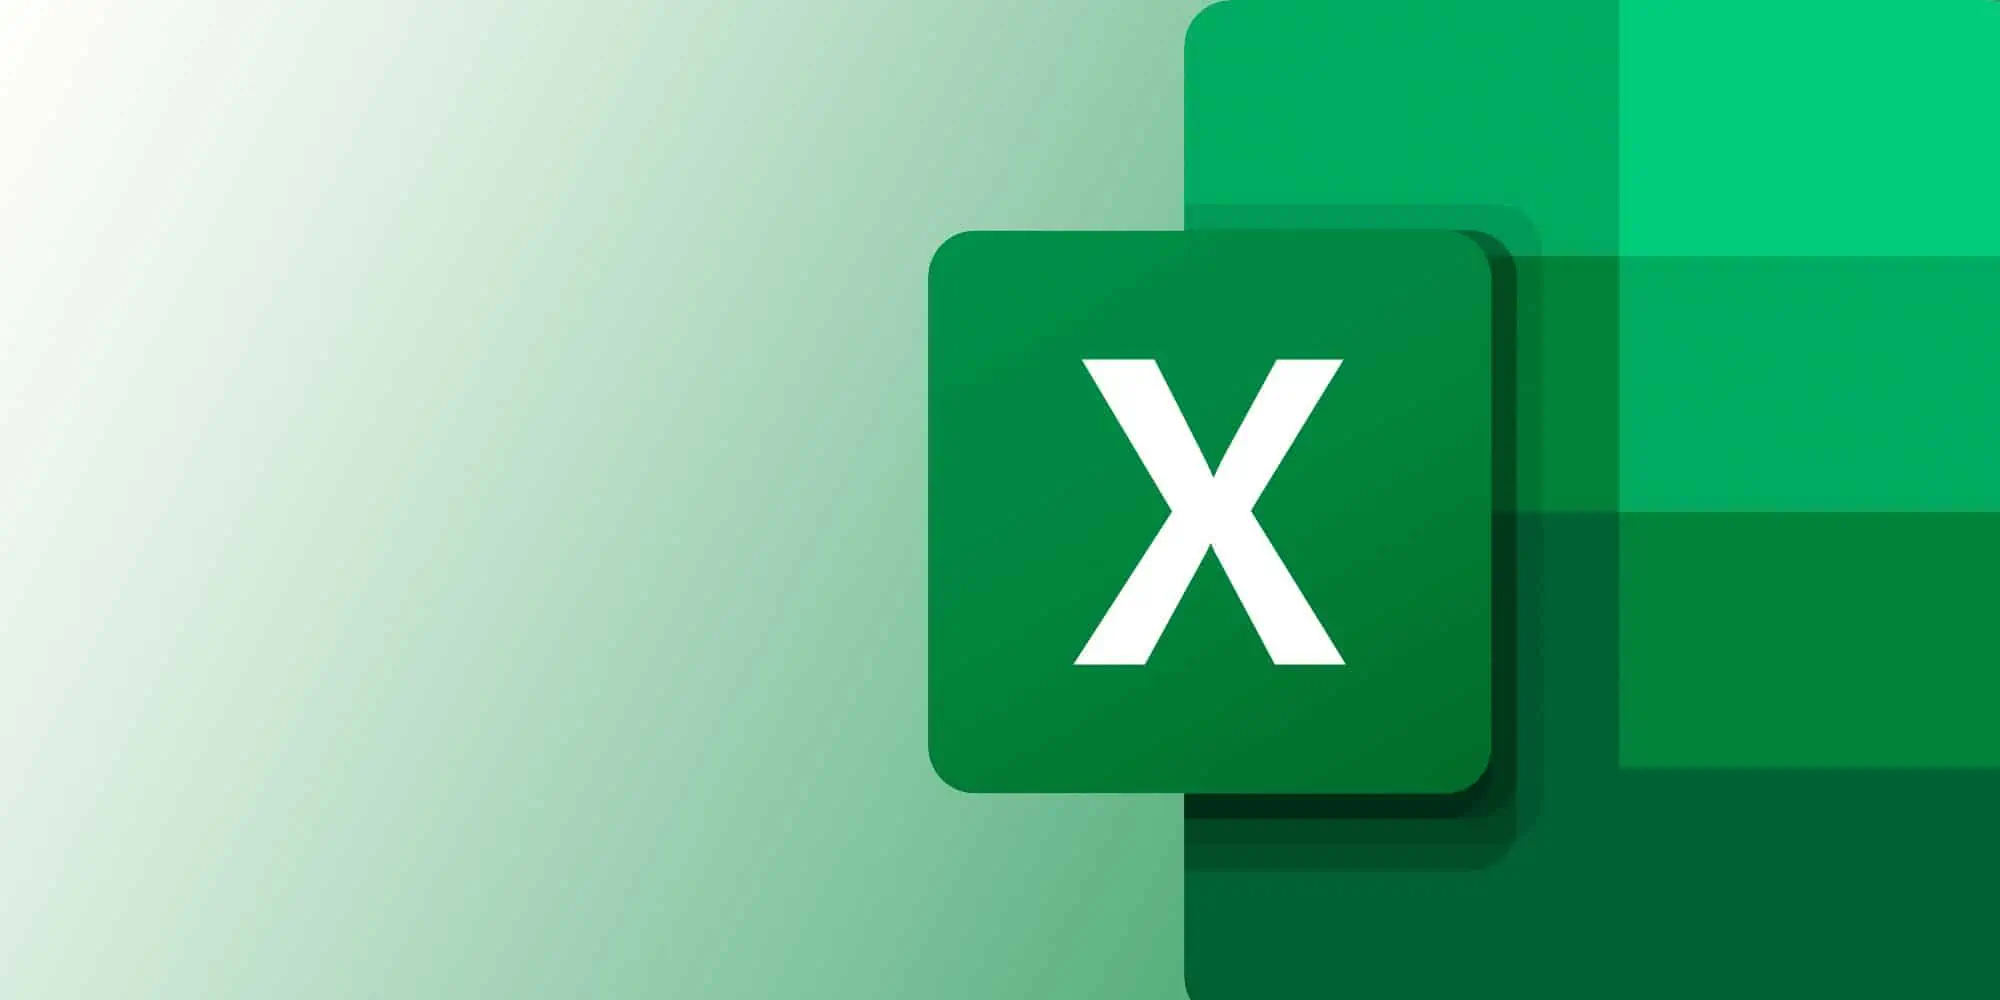 Excel Basics: Getting Started with Data Entry, Formatting, and Formulas